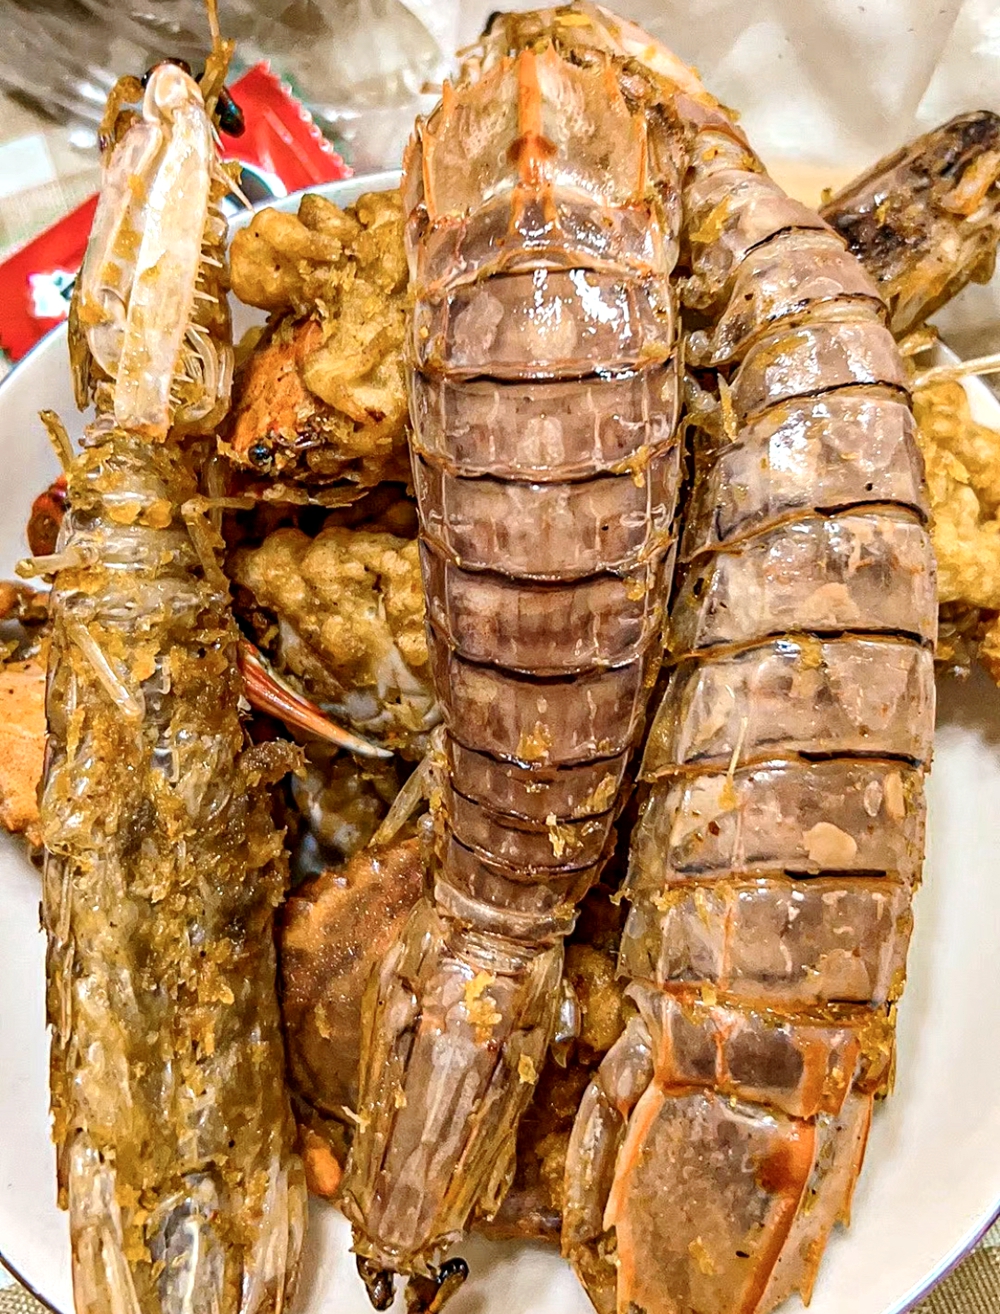 Fried mantis shrimps are seen in Haikou, south China's Hainan Province. /Photo provided to CGTN